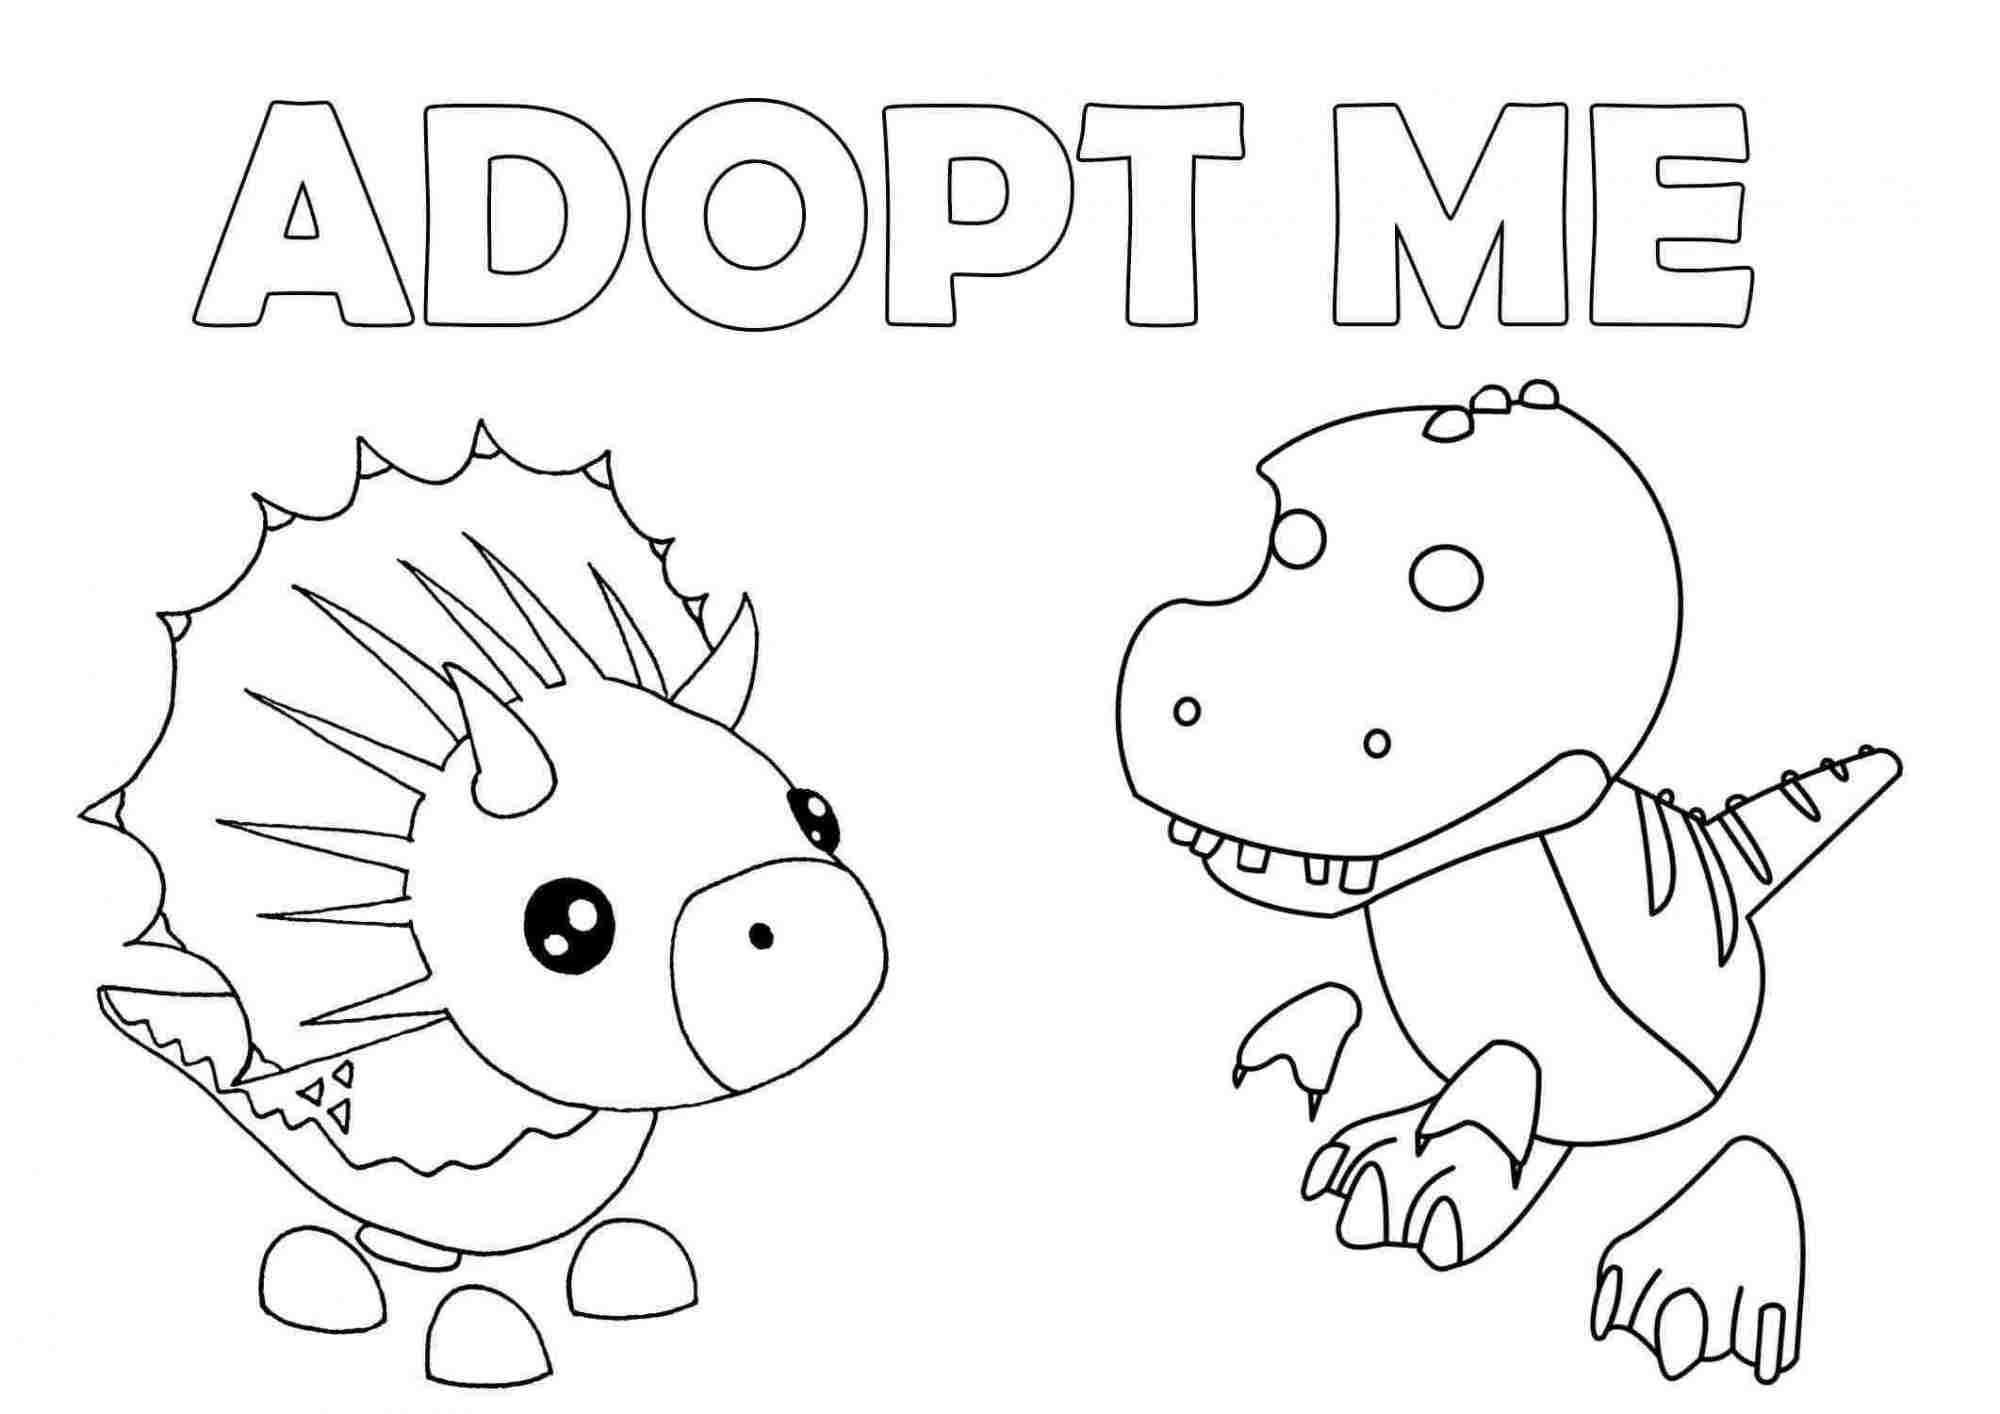 Cute Dinosaurs from Adopt me Coloring Pages   Adopt me Coloring ...